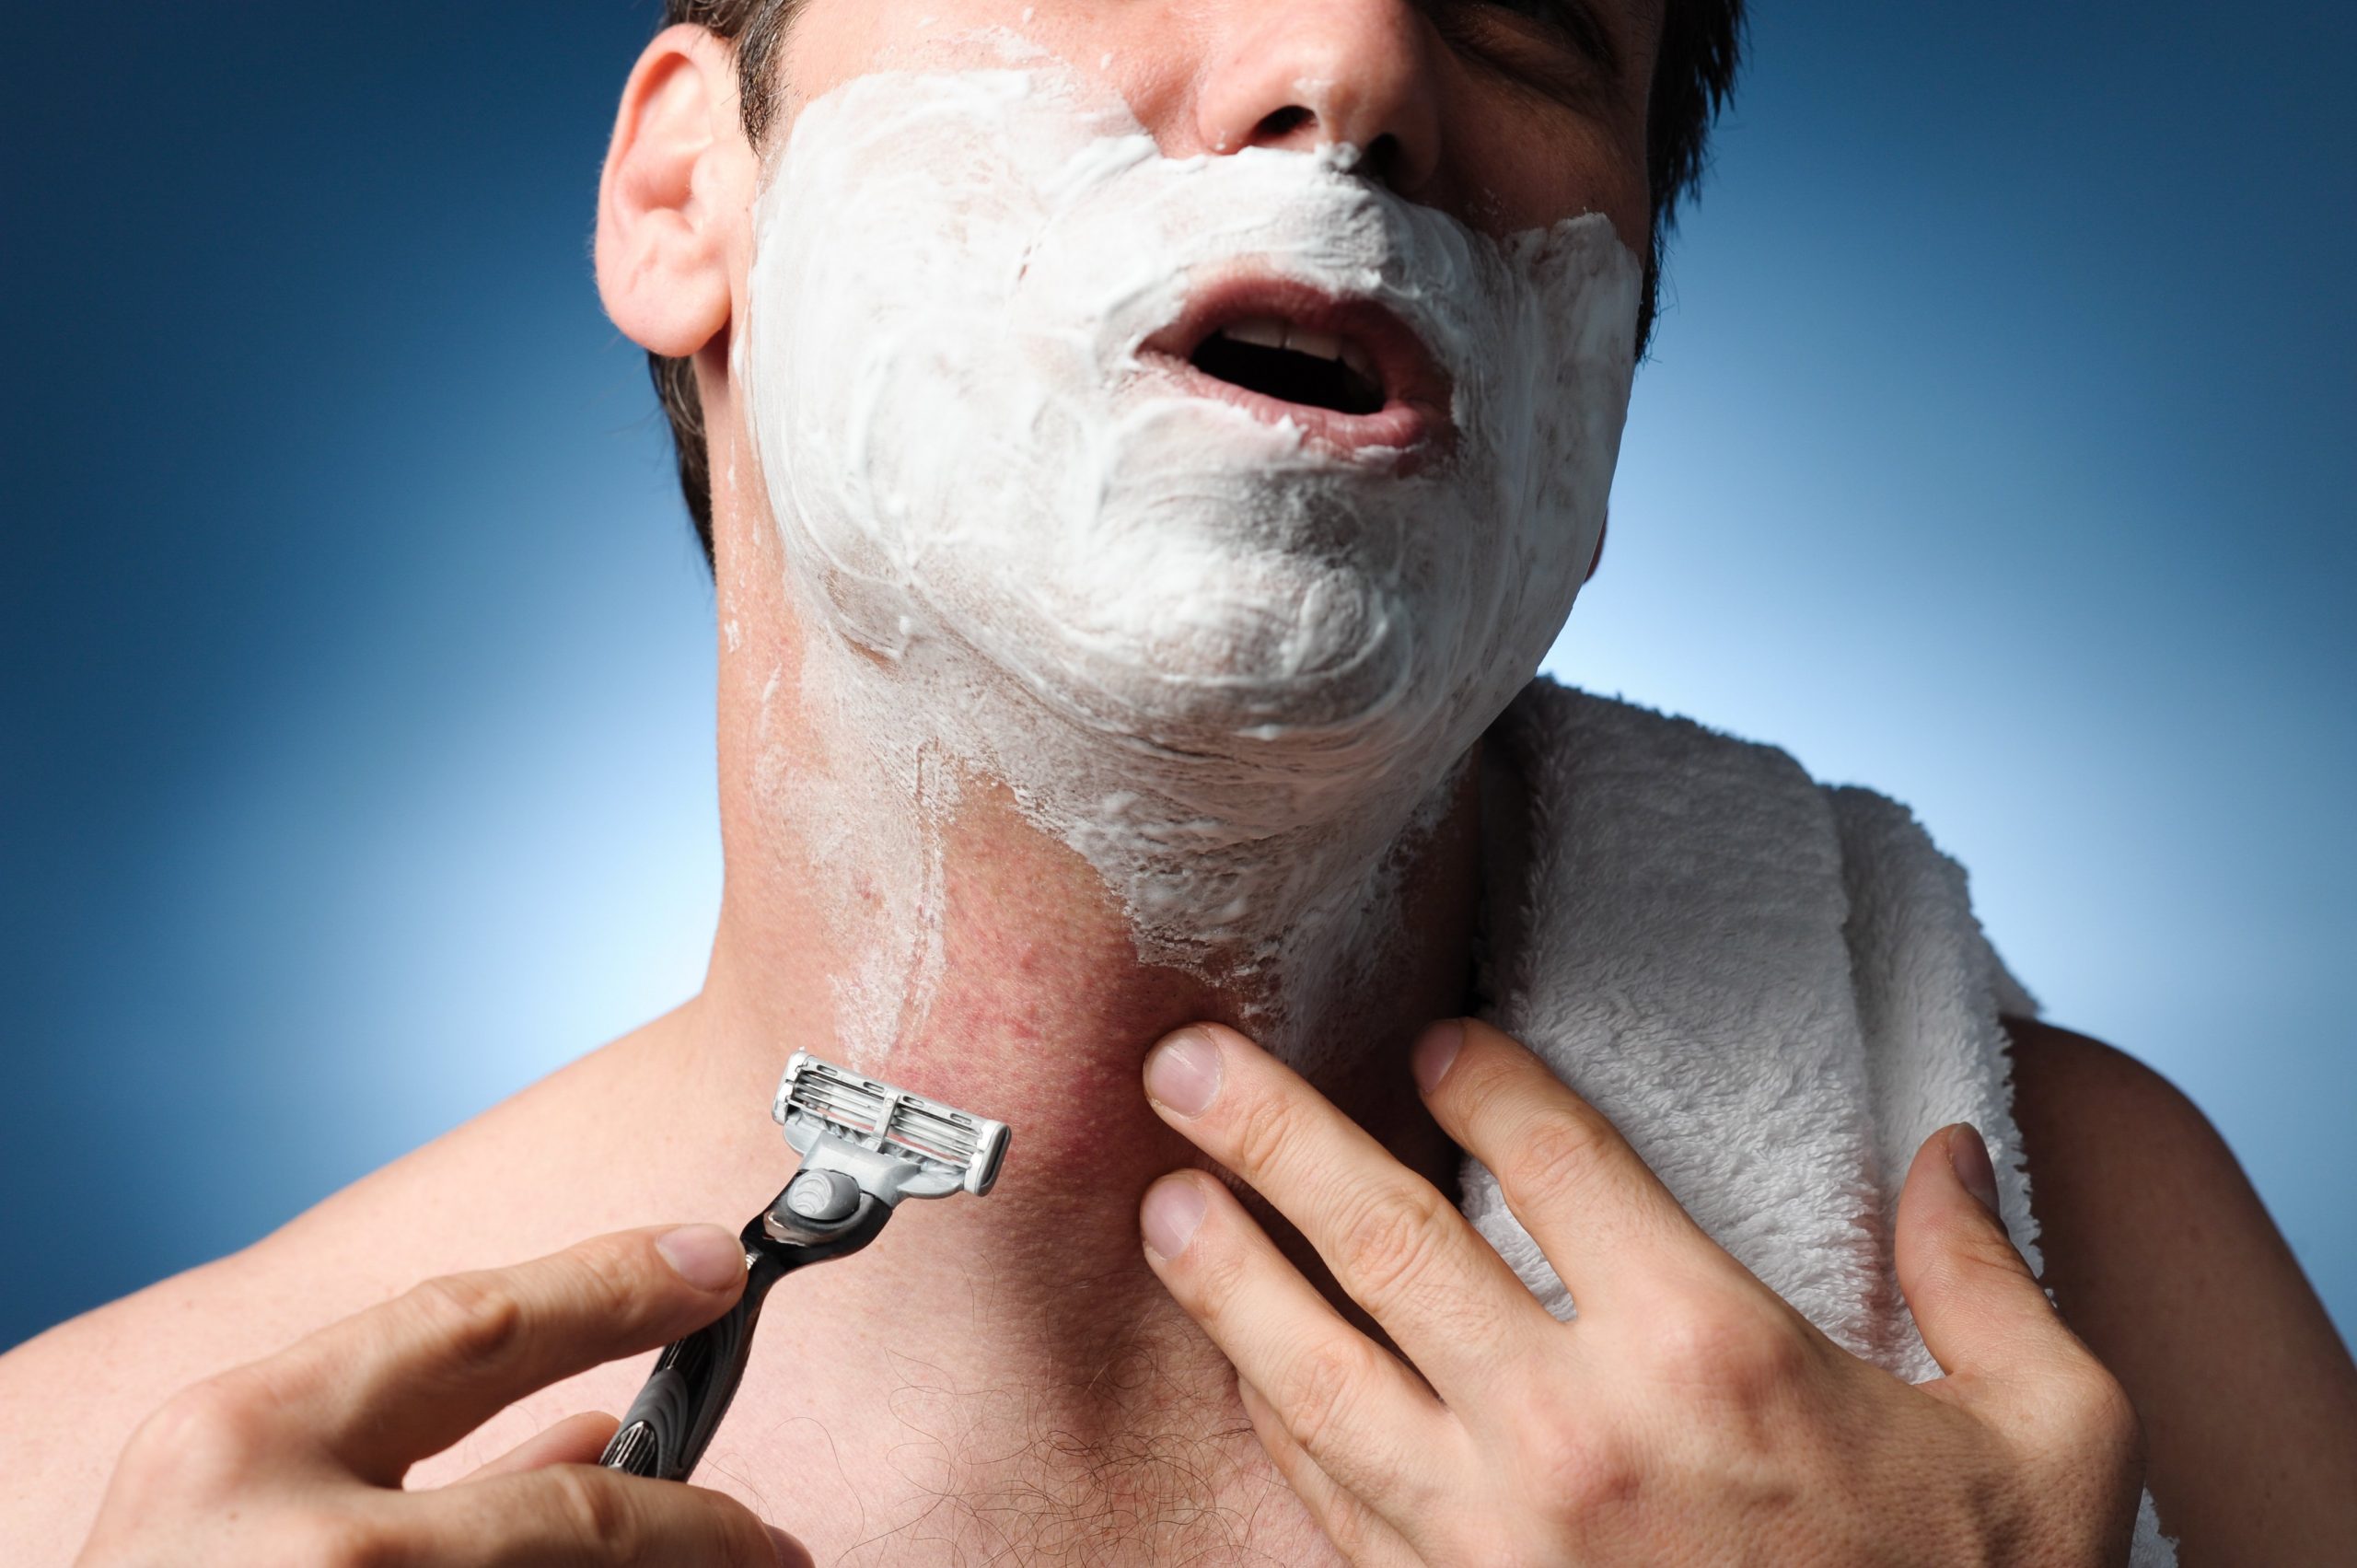 How to shave - The Magazine - SportsPassion.Net